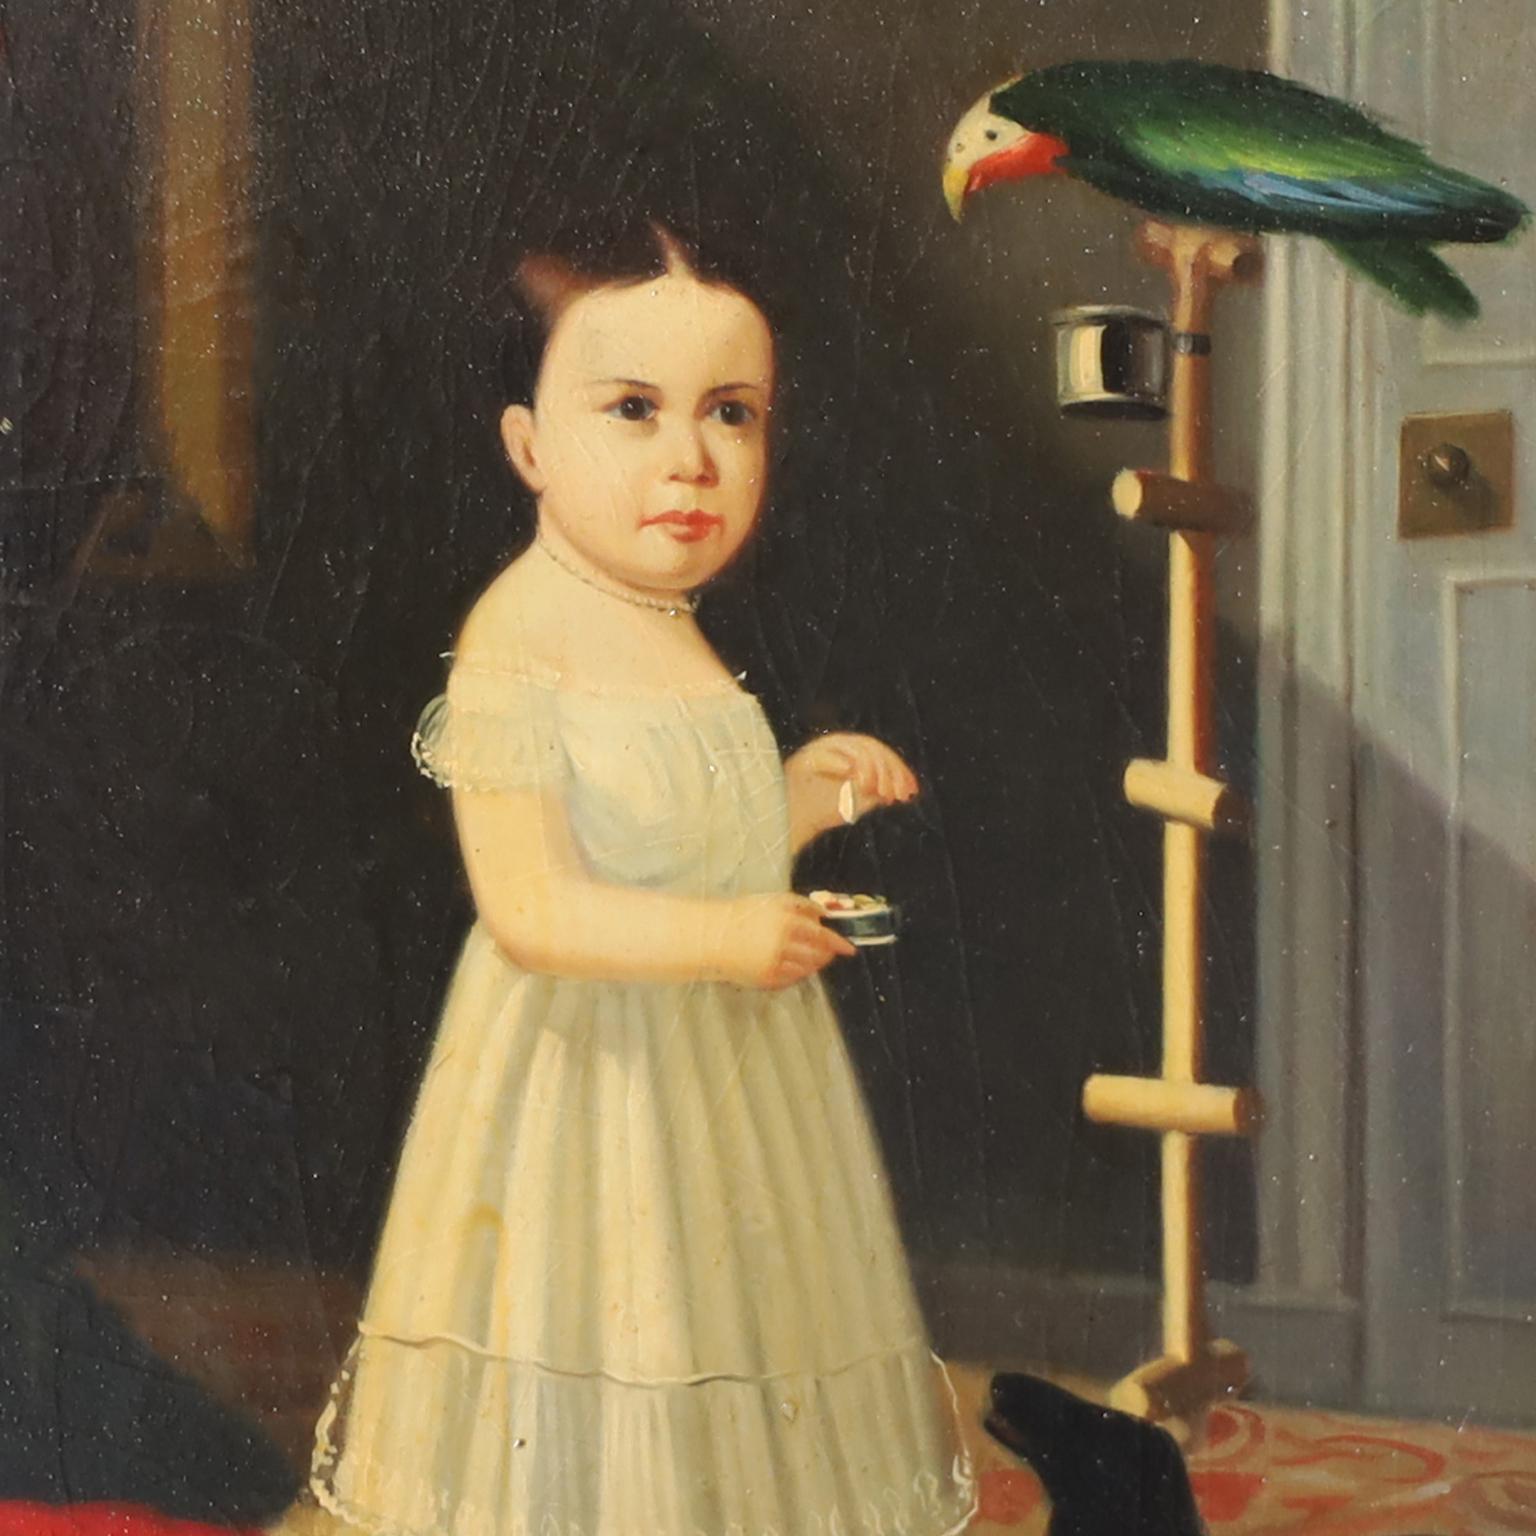 Intriguing 19th century oil painting on board of a young girl with her dog and parrot executed in a classical style with a touch of naivety. Presented in the original gilt wood frame.